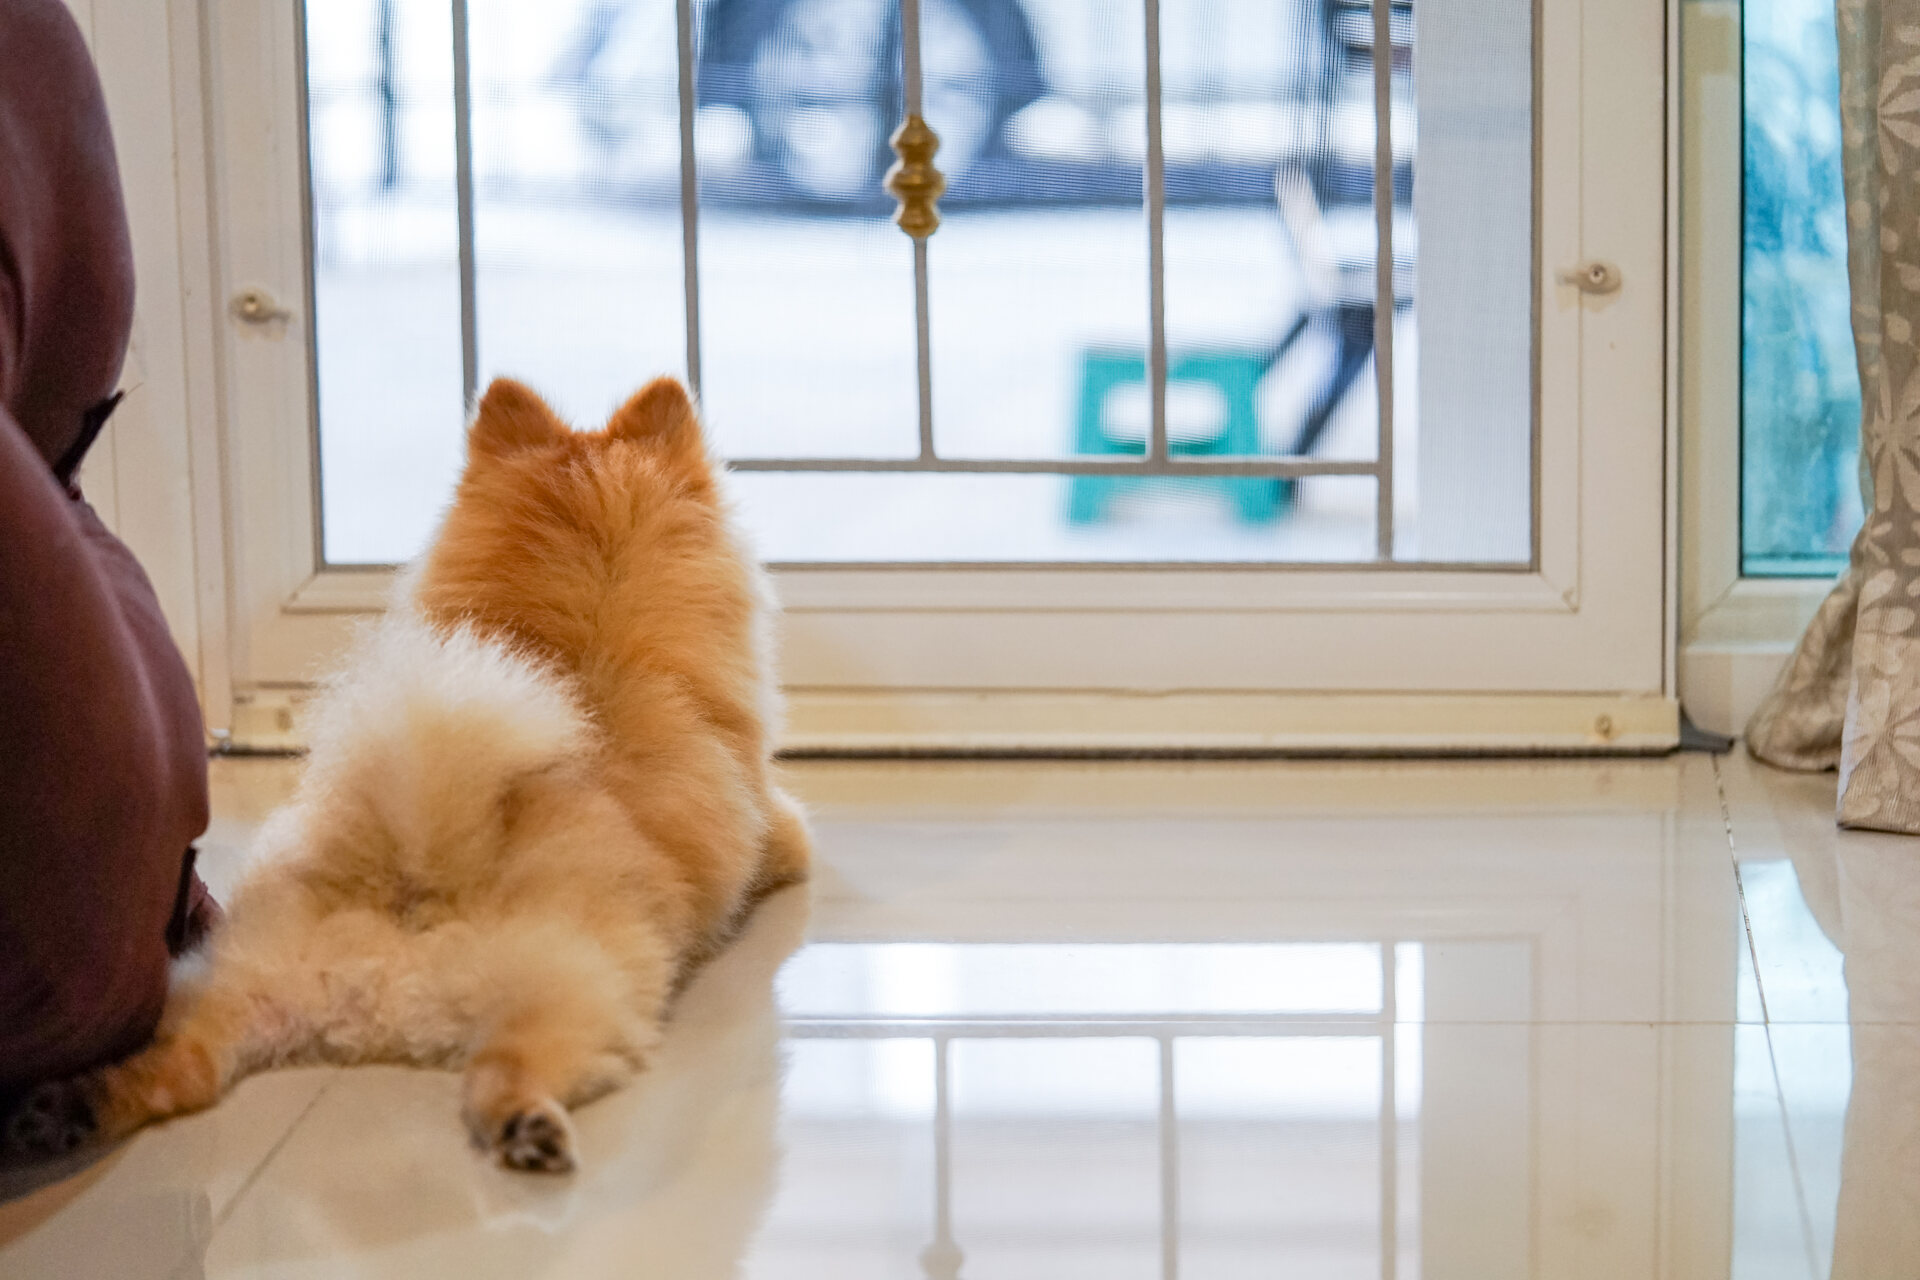 A dog waiting at the door for its owner to come back home